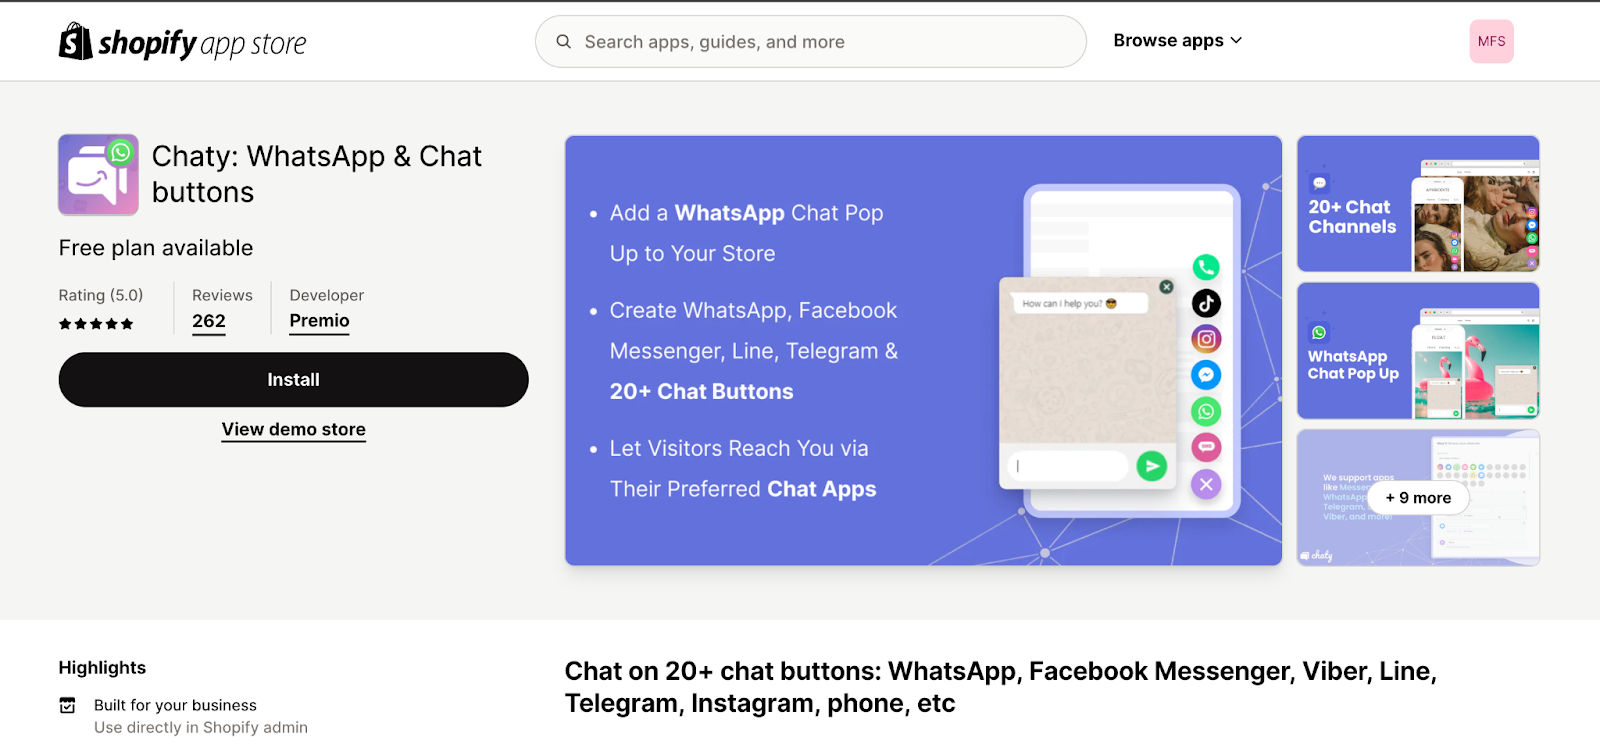 Chaty: WhatsApp & Chat Buttons on Shopify